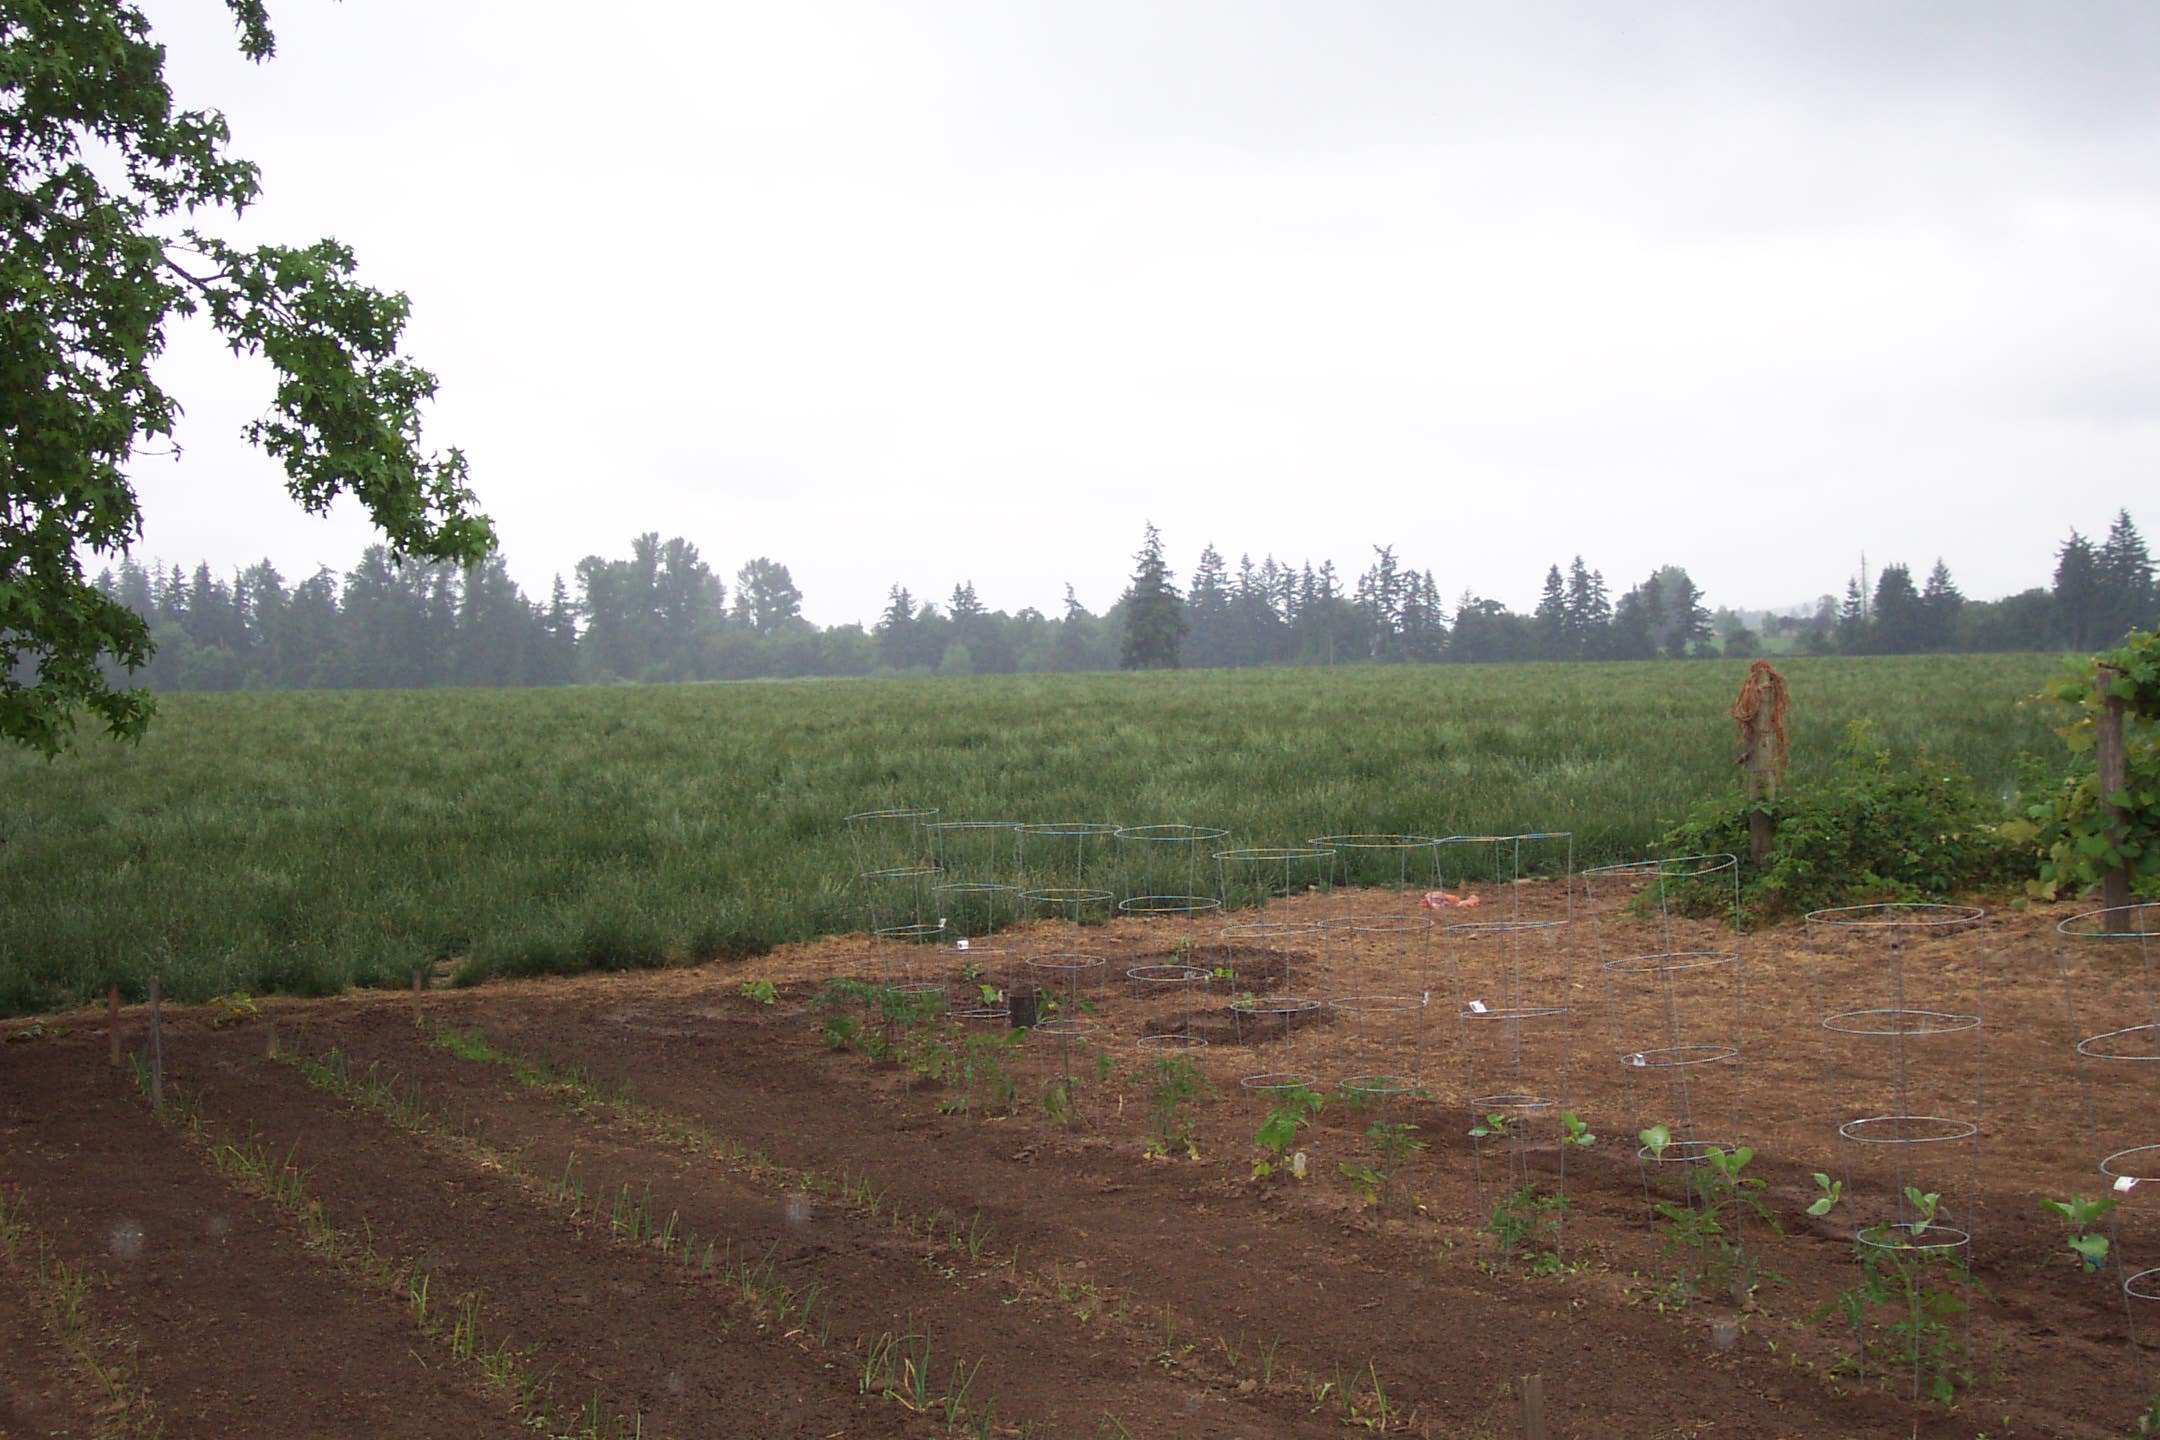 Myron and Keven's second farm, Oster II, Woodburn, Oregon, June 2007. A view of their 50 acres in grass seed.